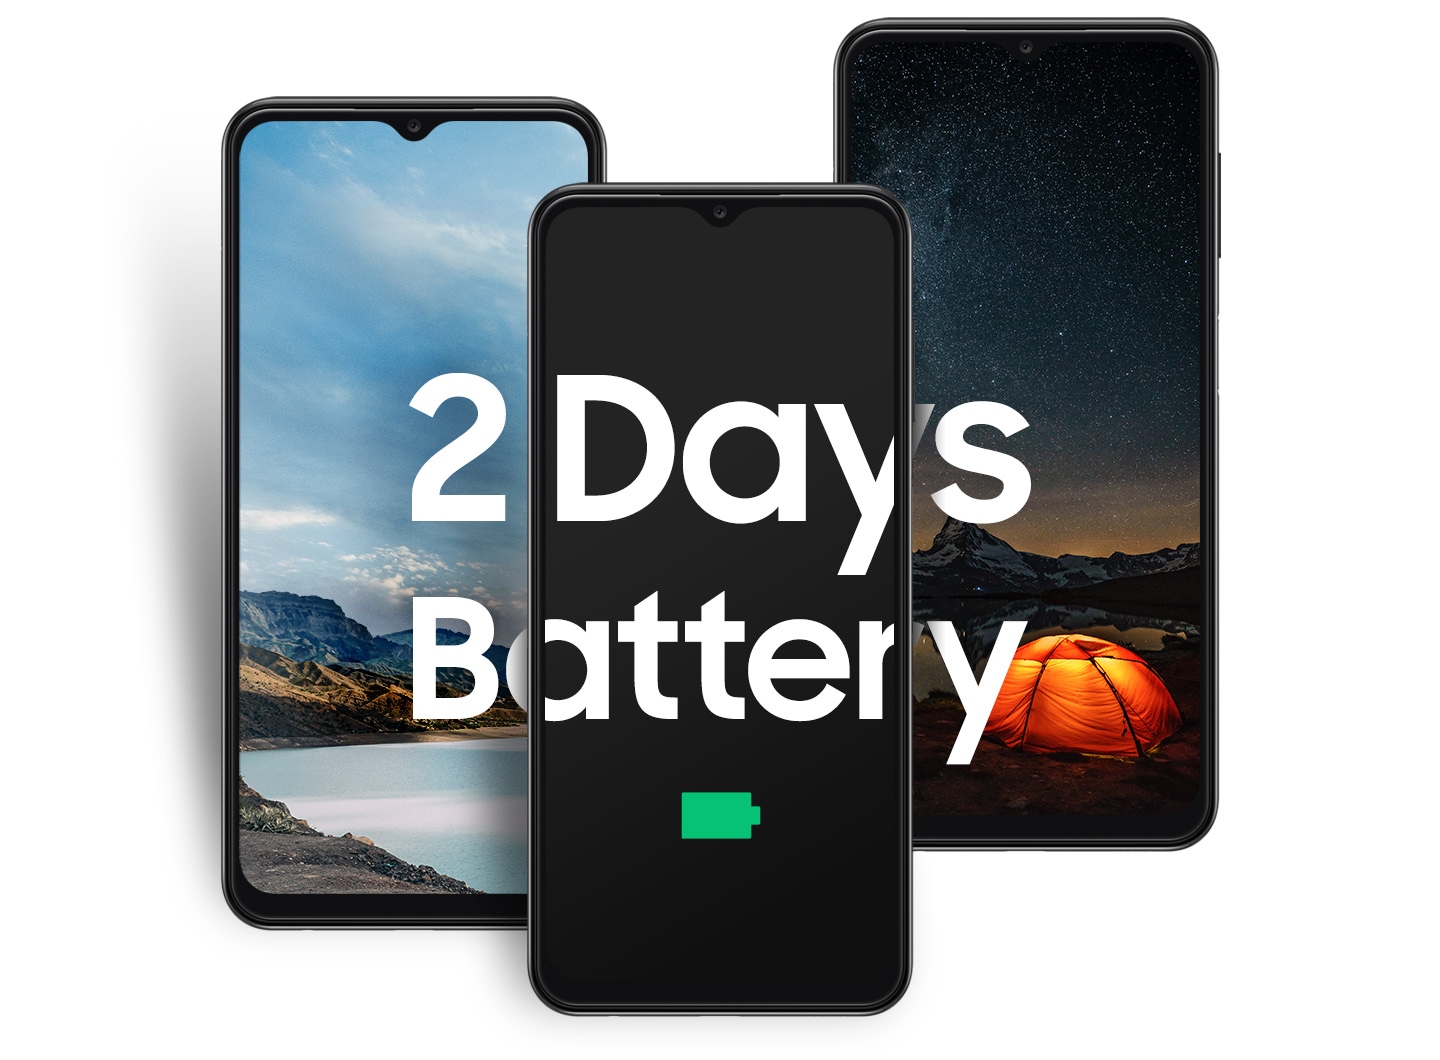 Samsung Galaxy A13 battery life, 2 Days Battery. The device is placed between two landscape images, showing the scenery of the coast during the day and the scenery of tents and mountains at night. 